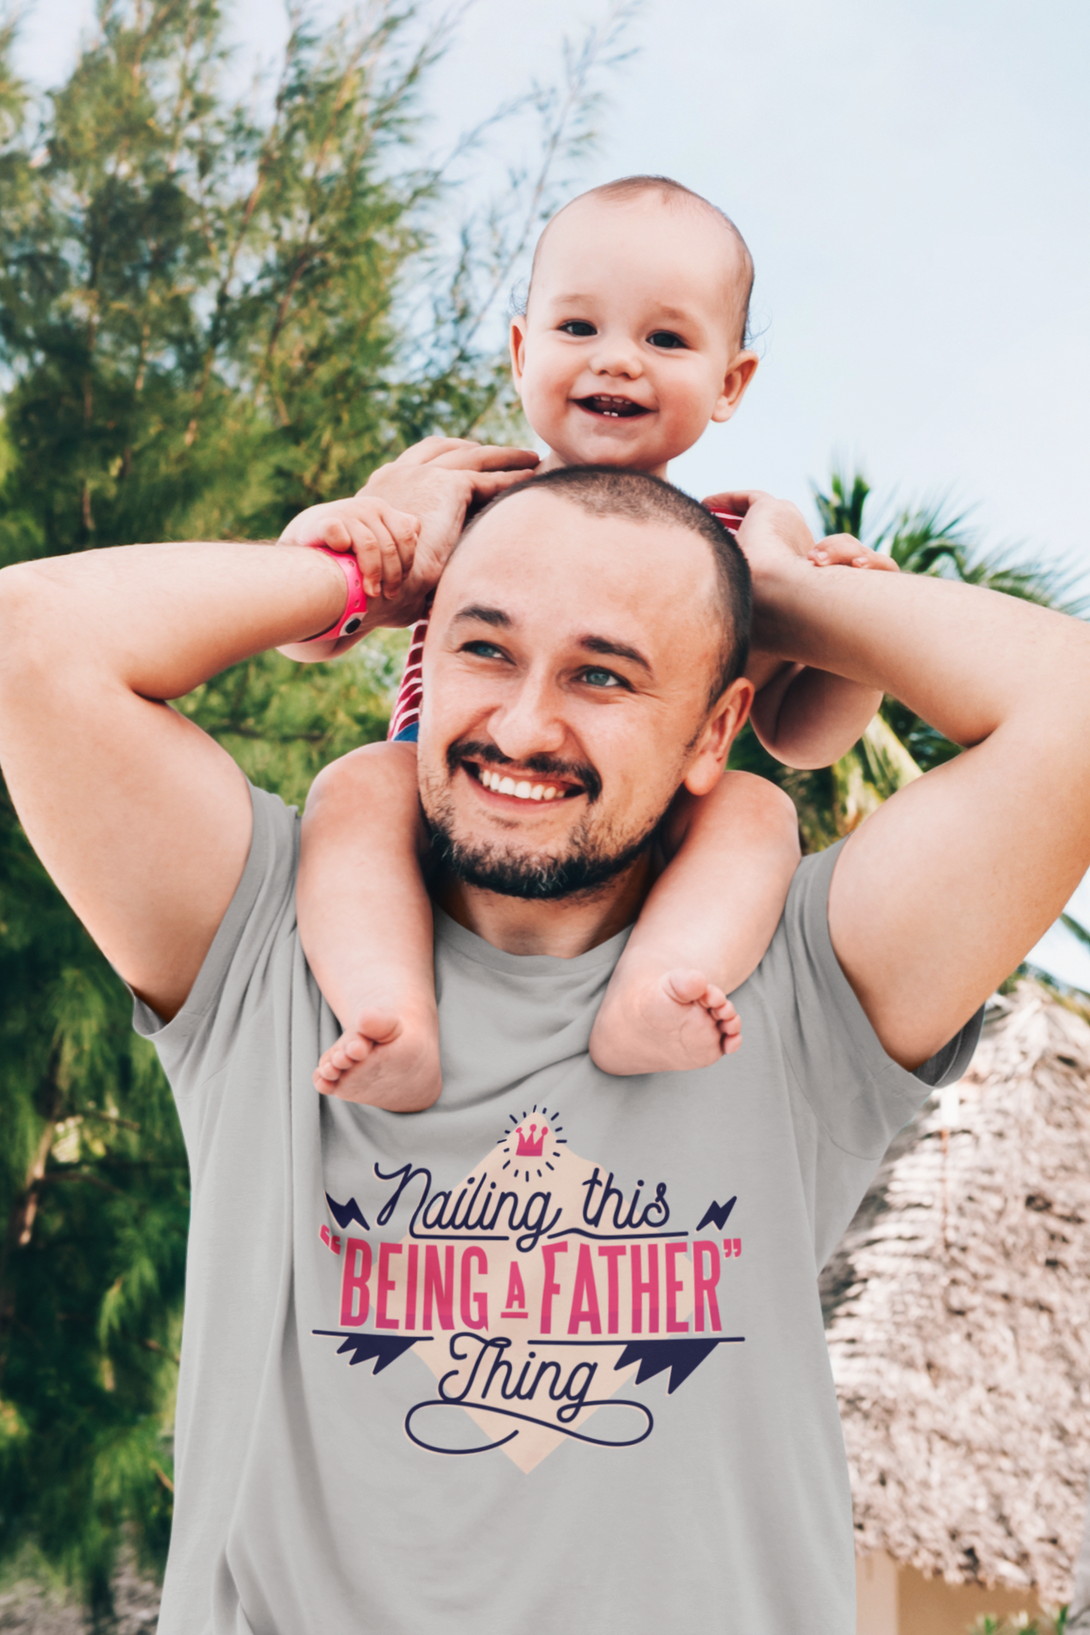 Nailing This Being A Father Thing Printed T-Shirt For Men - WowWaves - 4